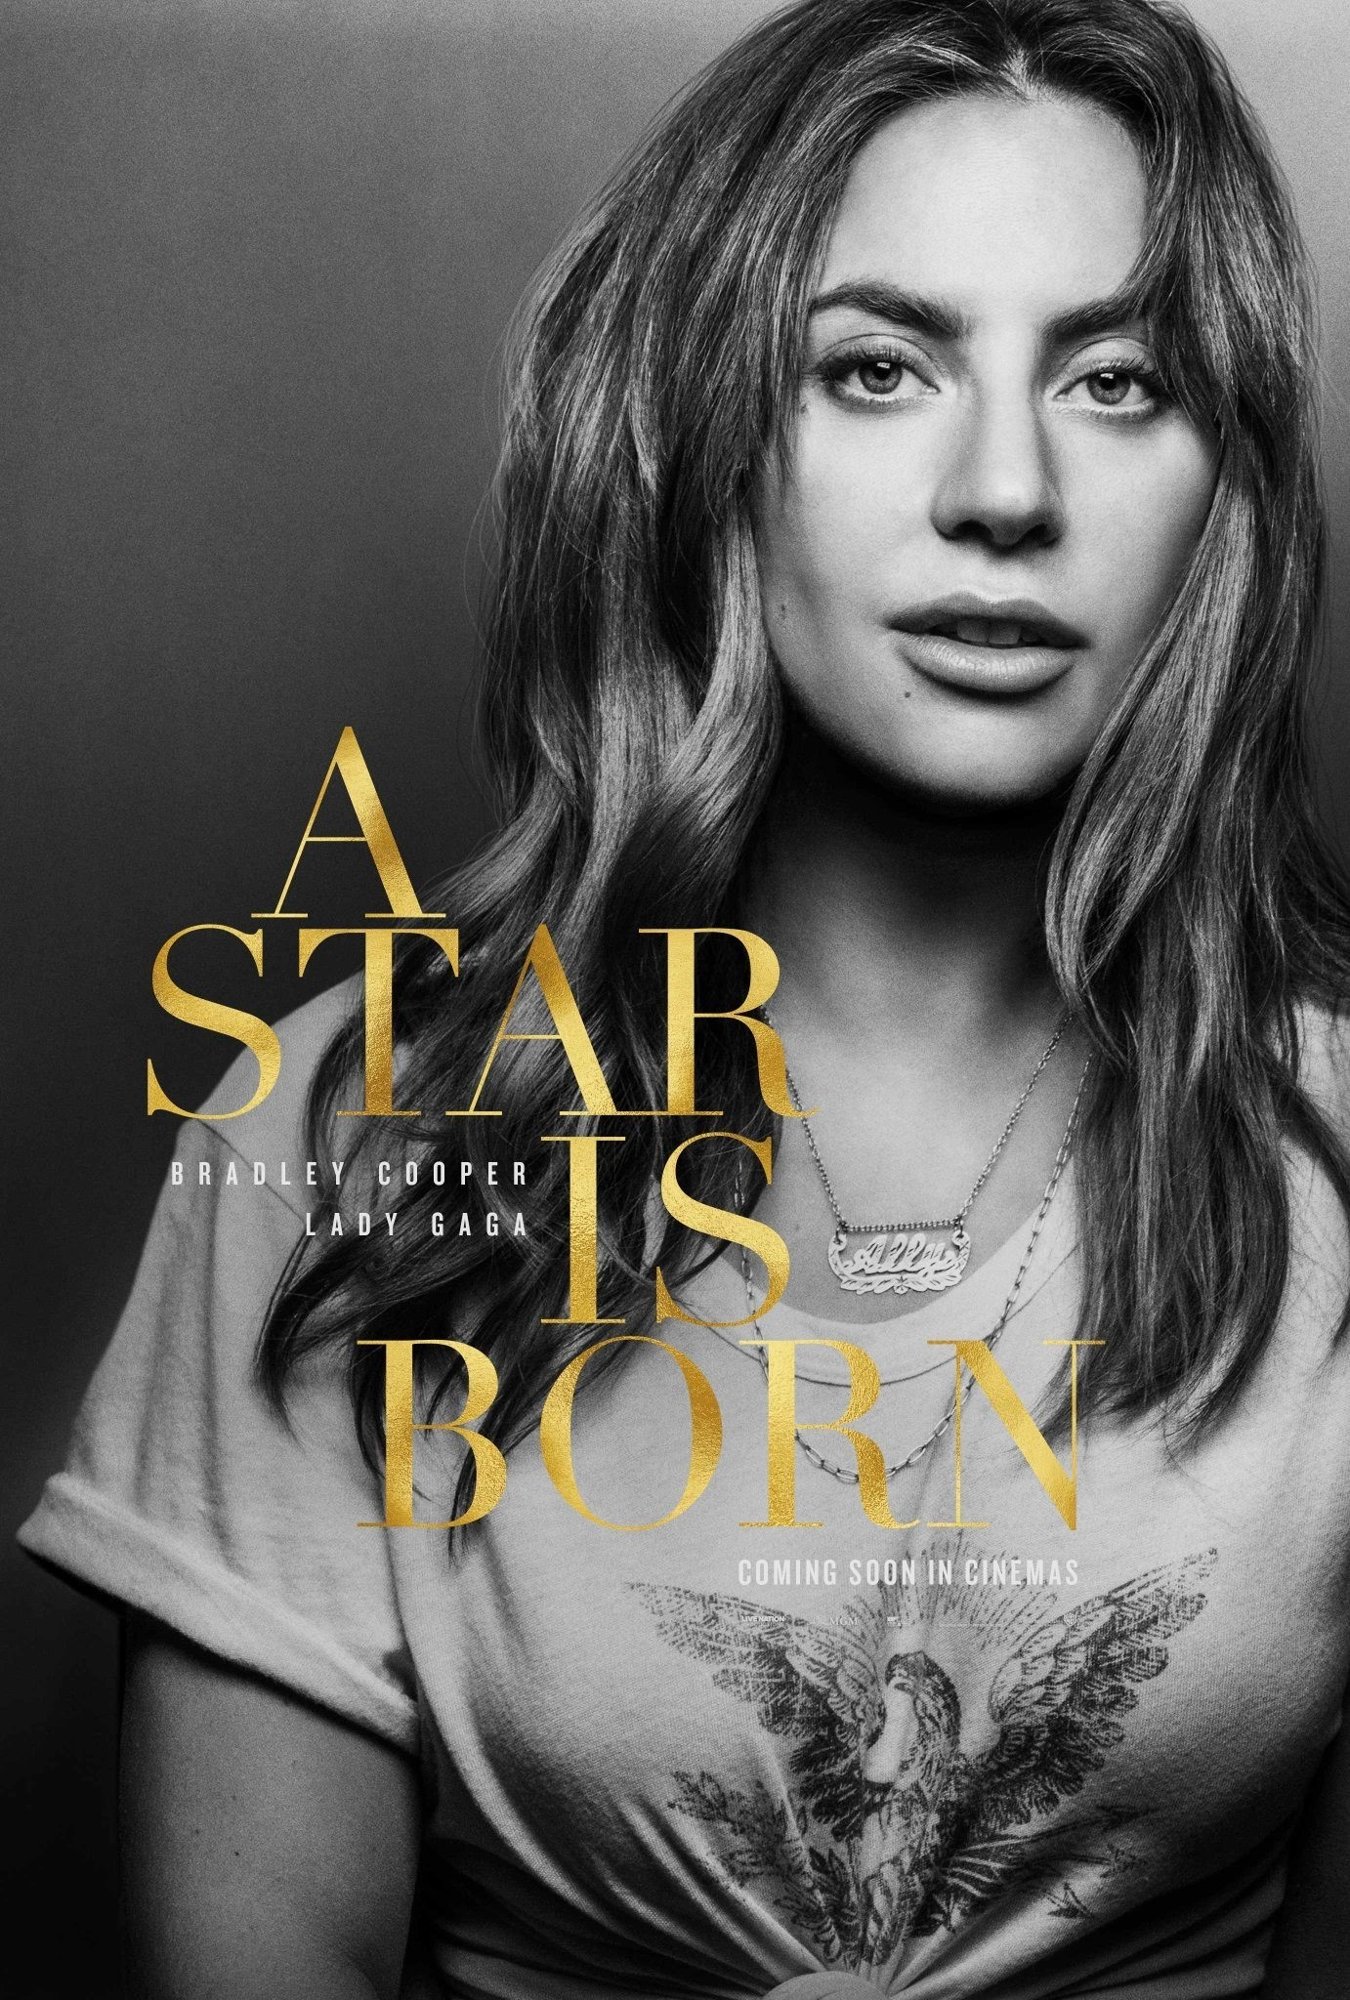 A Star Is Born (2018) Pictures, Trailer, Reviews, News, DVD and Soundtrack